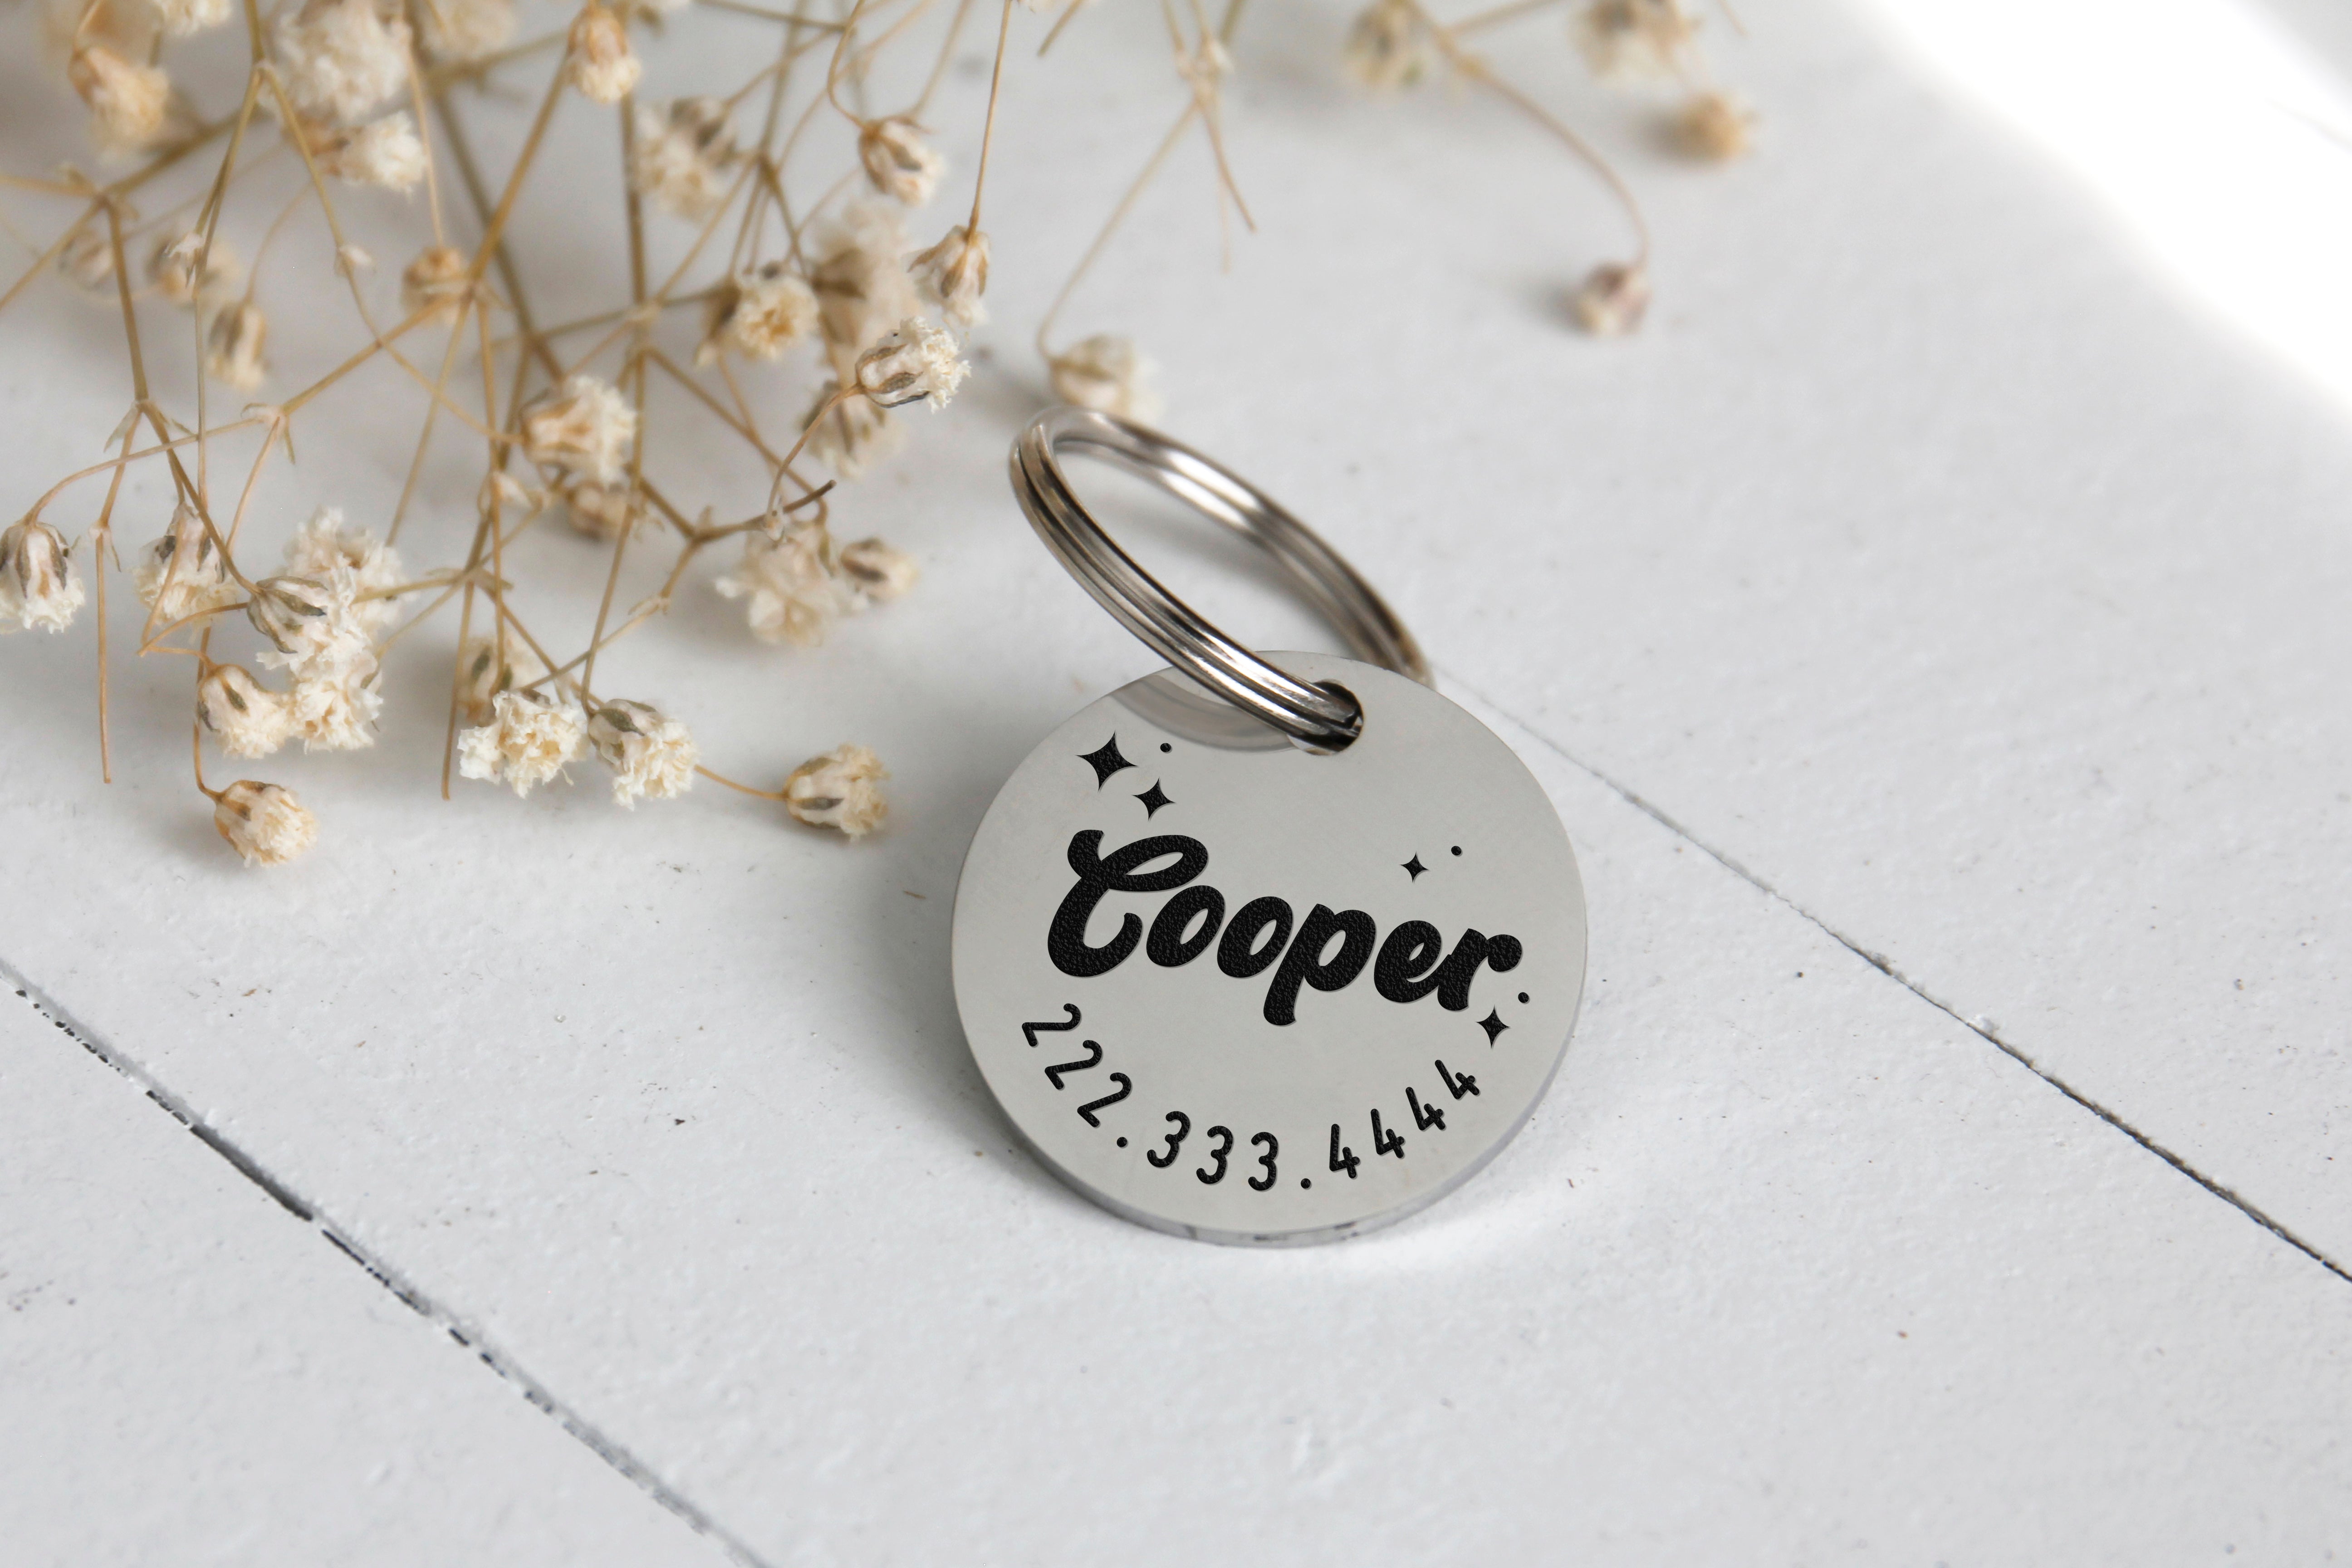 Retro Style Stainless Steel Pet ID Tag